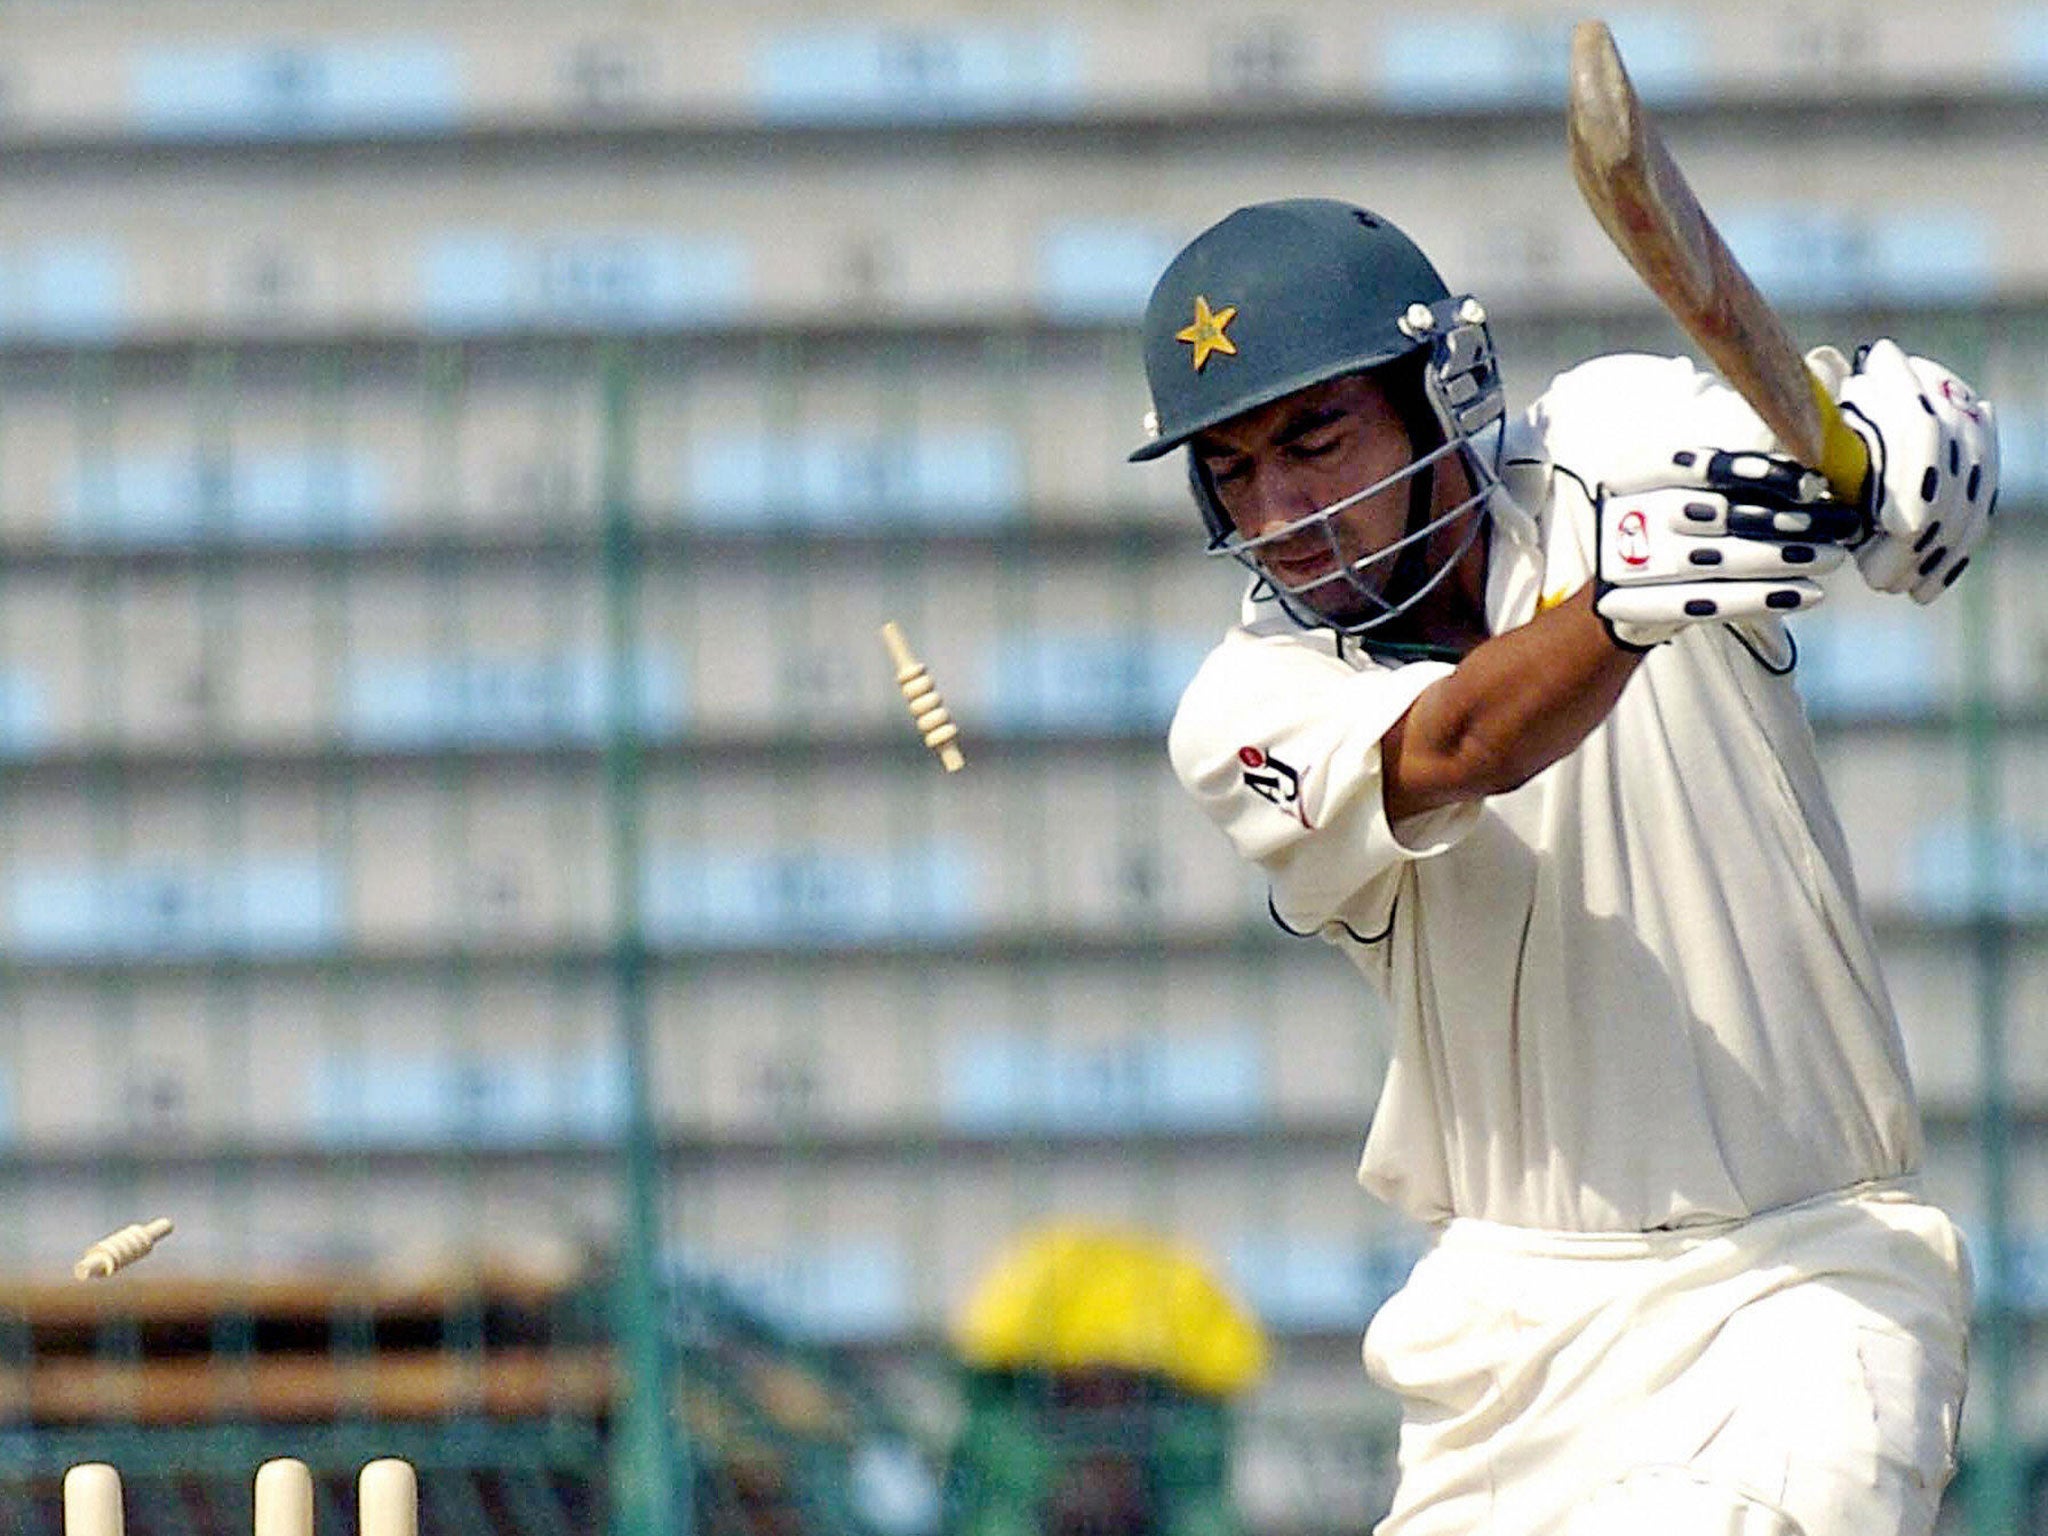 Hasan Raza was either 14 or 15 when he made his Test debut for Pakistan, depending on who you listen to